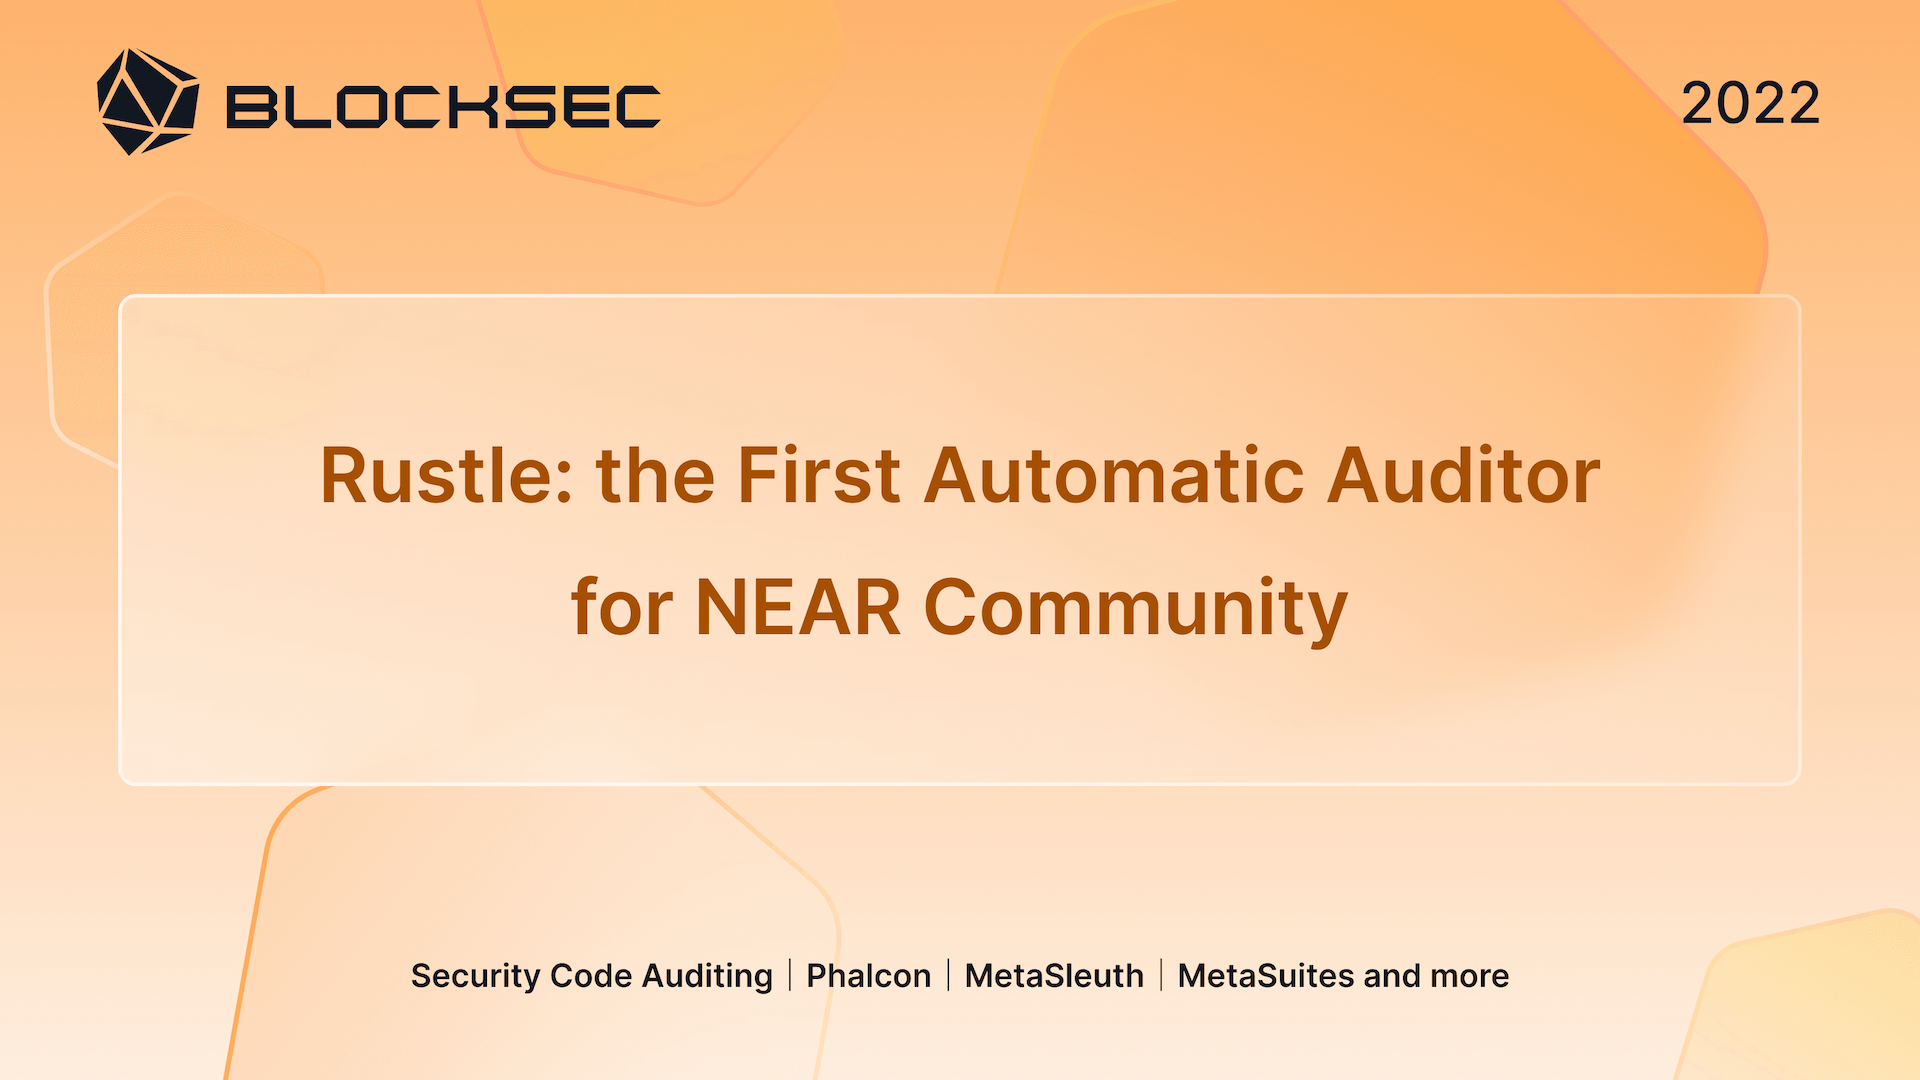 Rustle: the First Automatic Auditor for NEAR Community